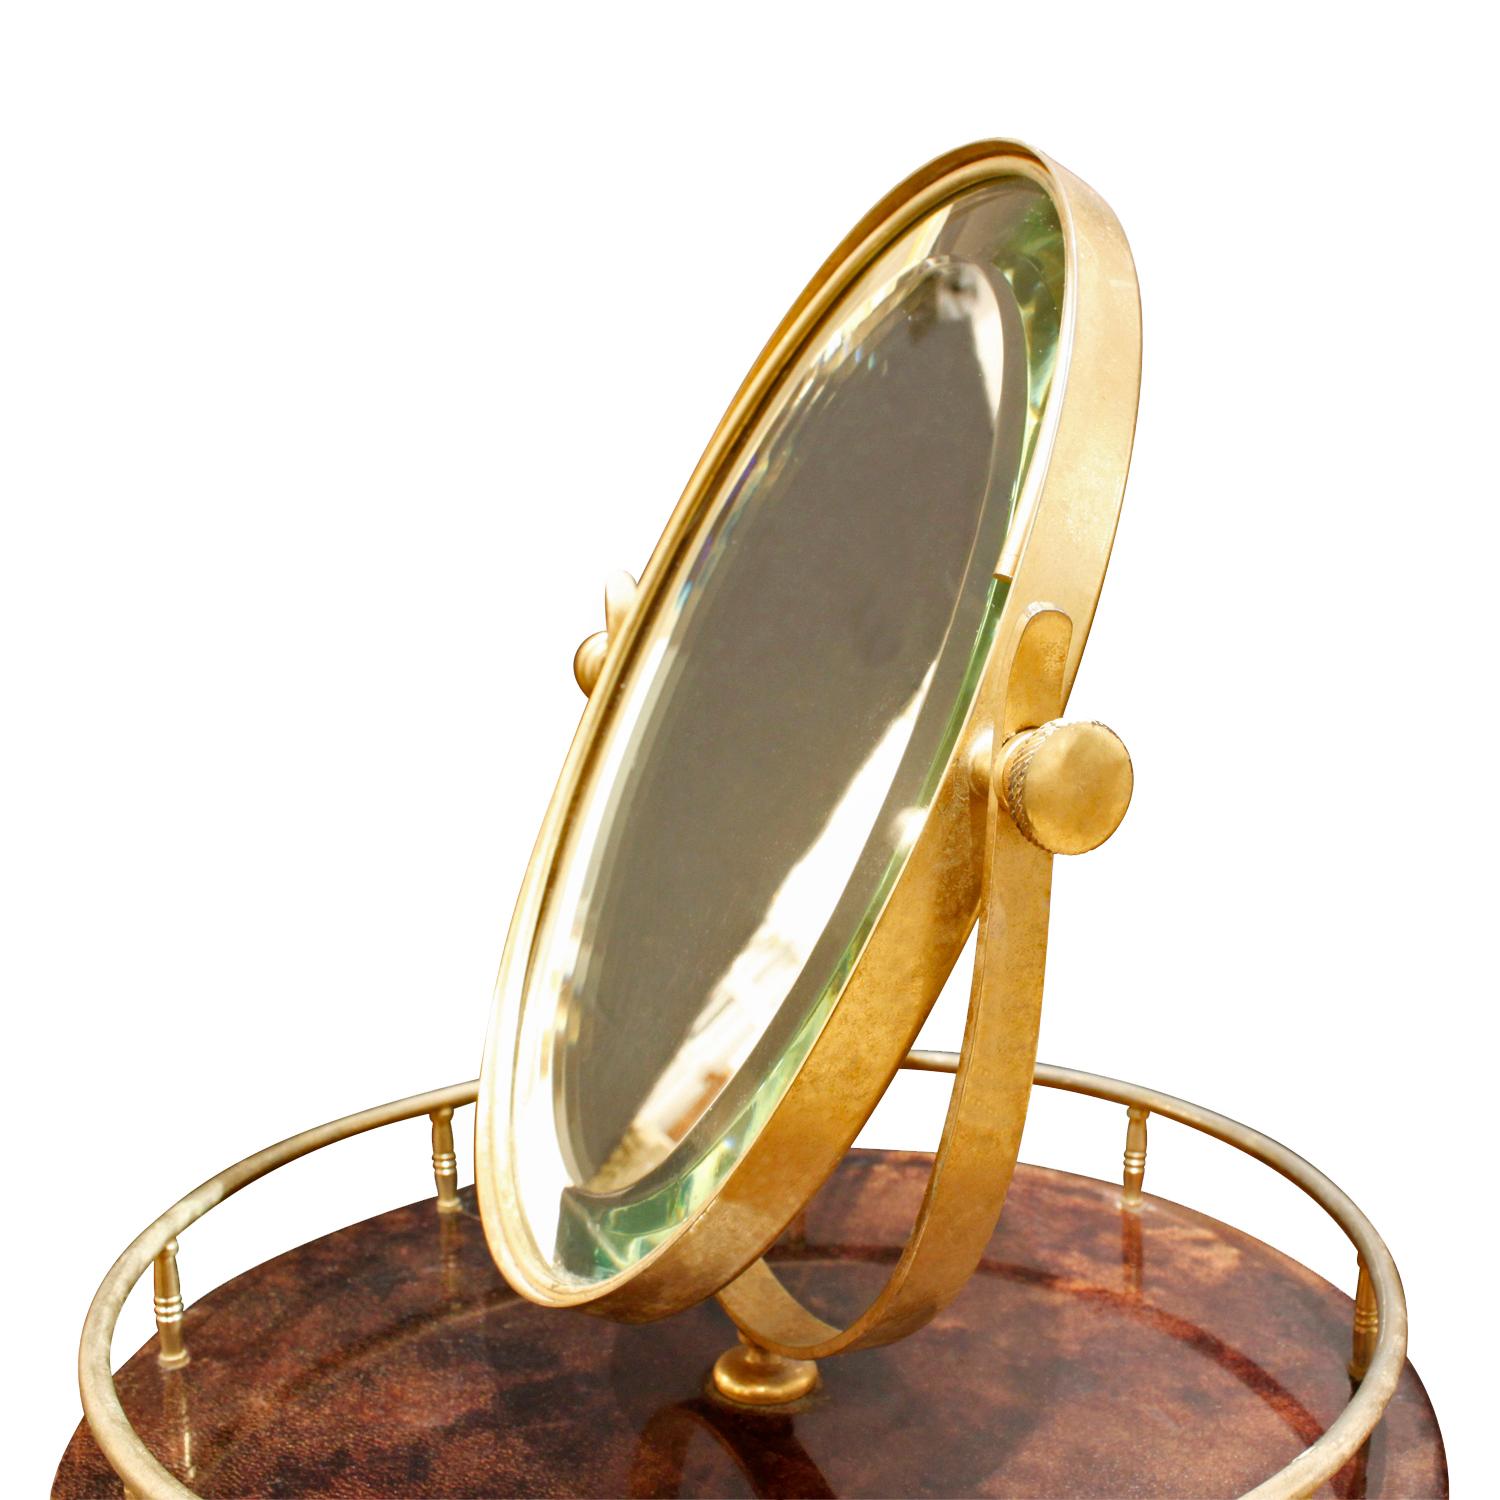 Hand-Crafted Aldo Tura Adjustable Vanity Mirror in Lacquered Goatskin, 1970s For Sale